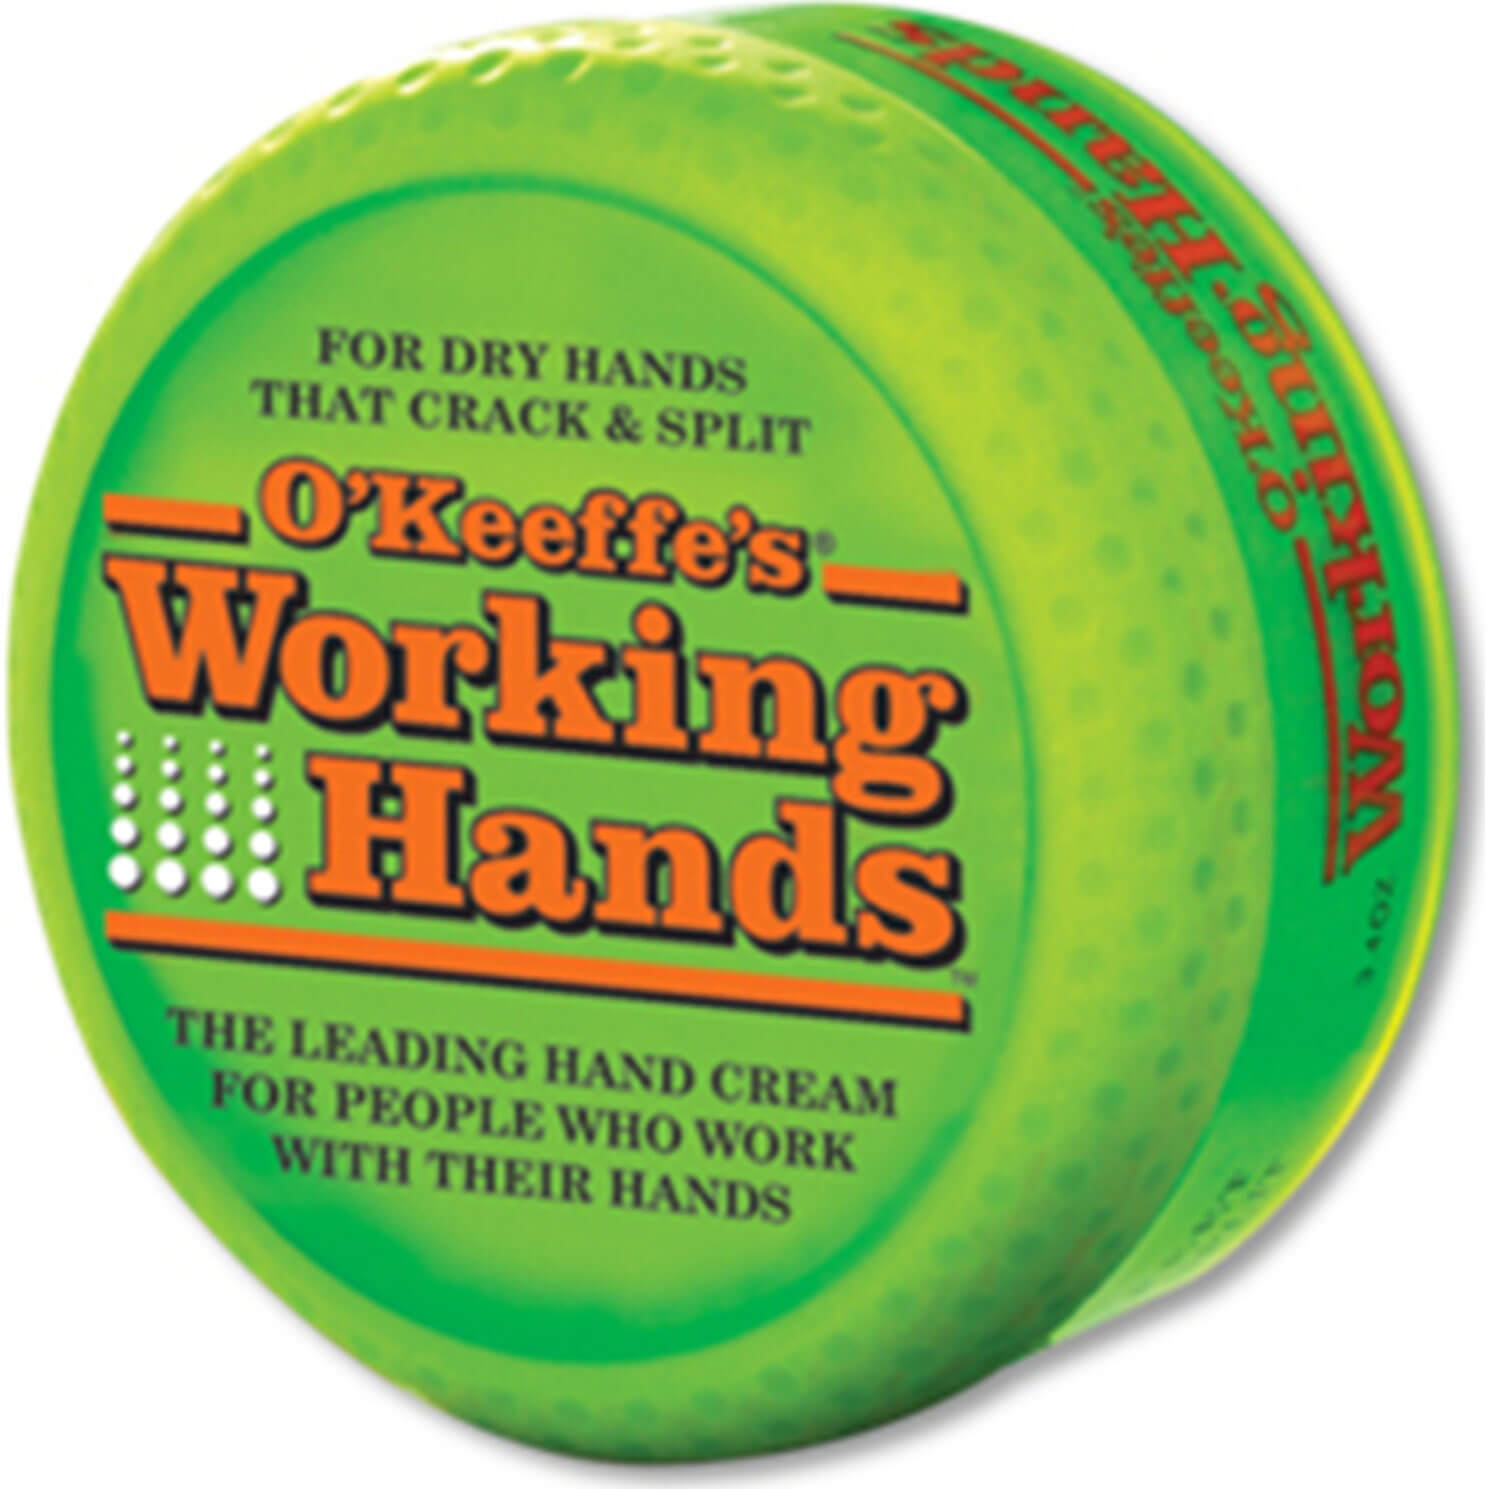 Image of O Keefes Working Hands Hand Cream